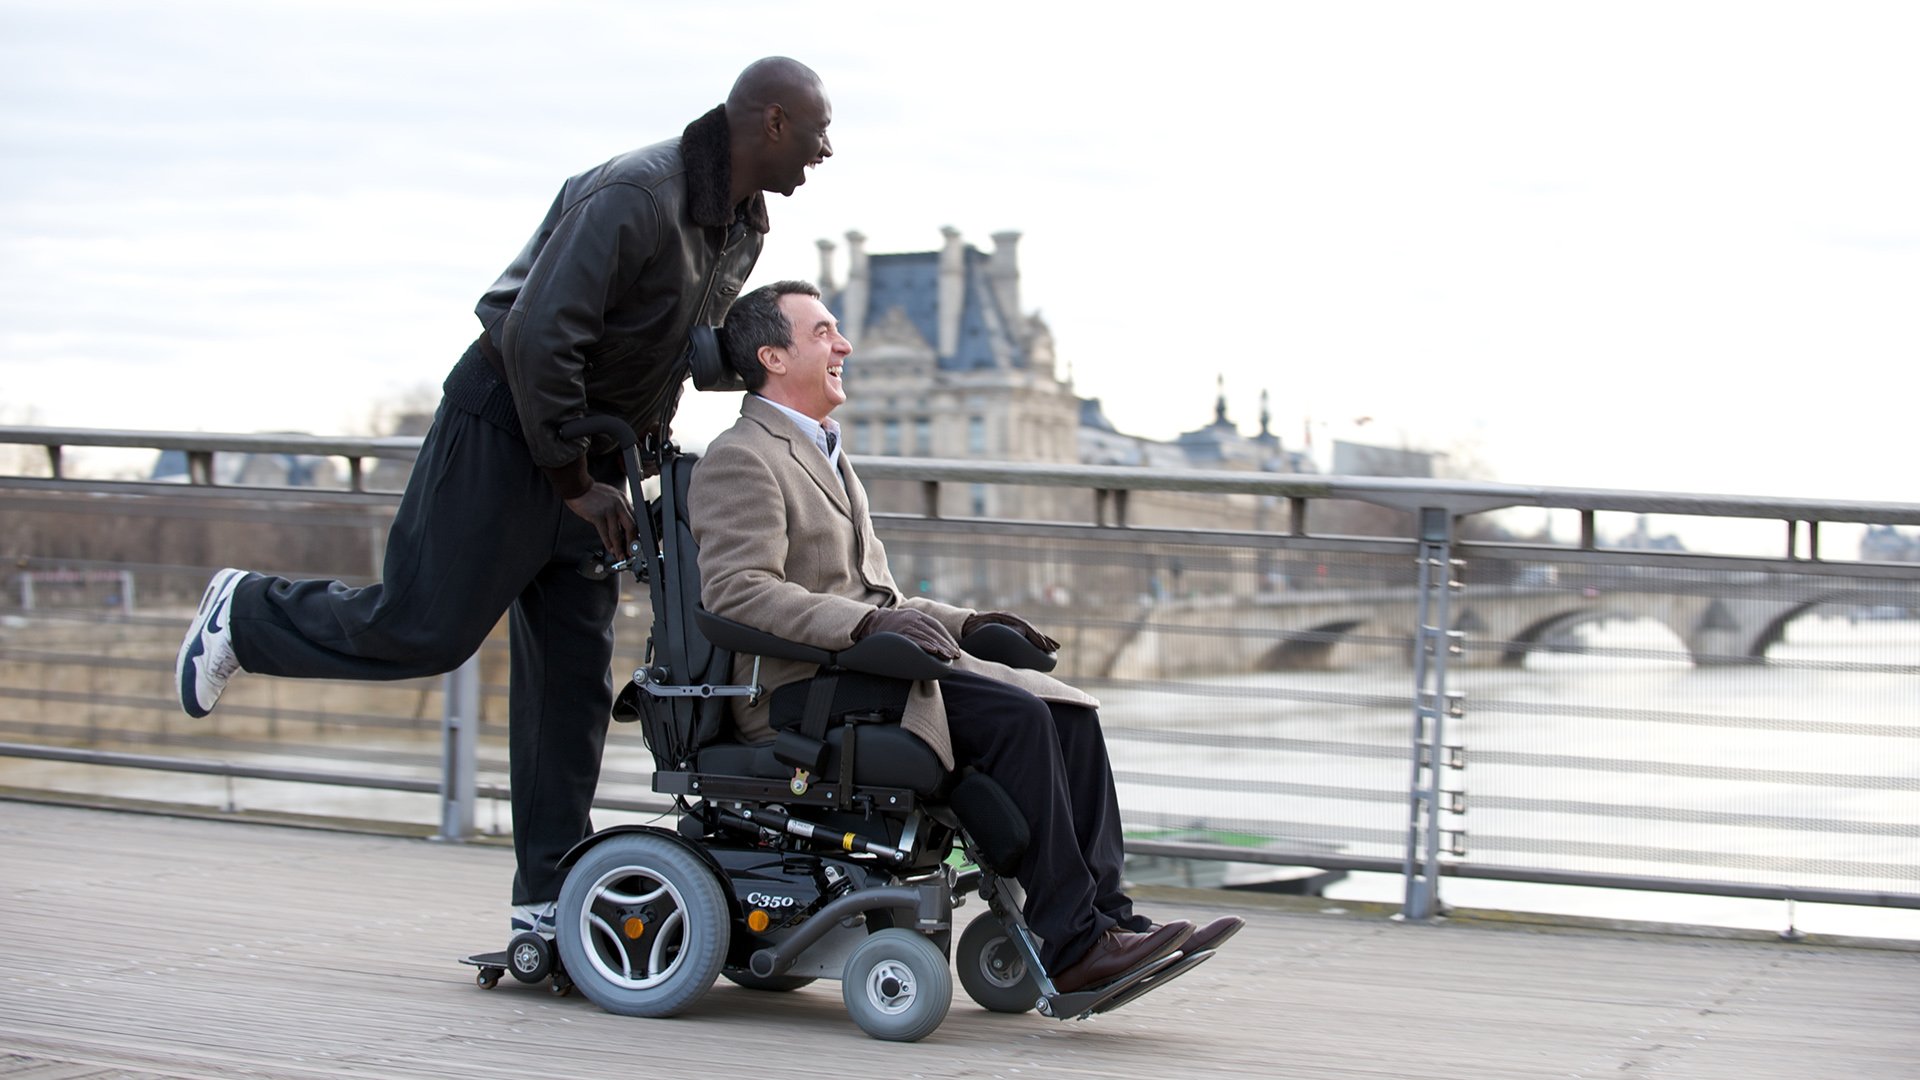 The Intouchables HD Wallpaper Background Image Id